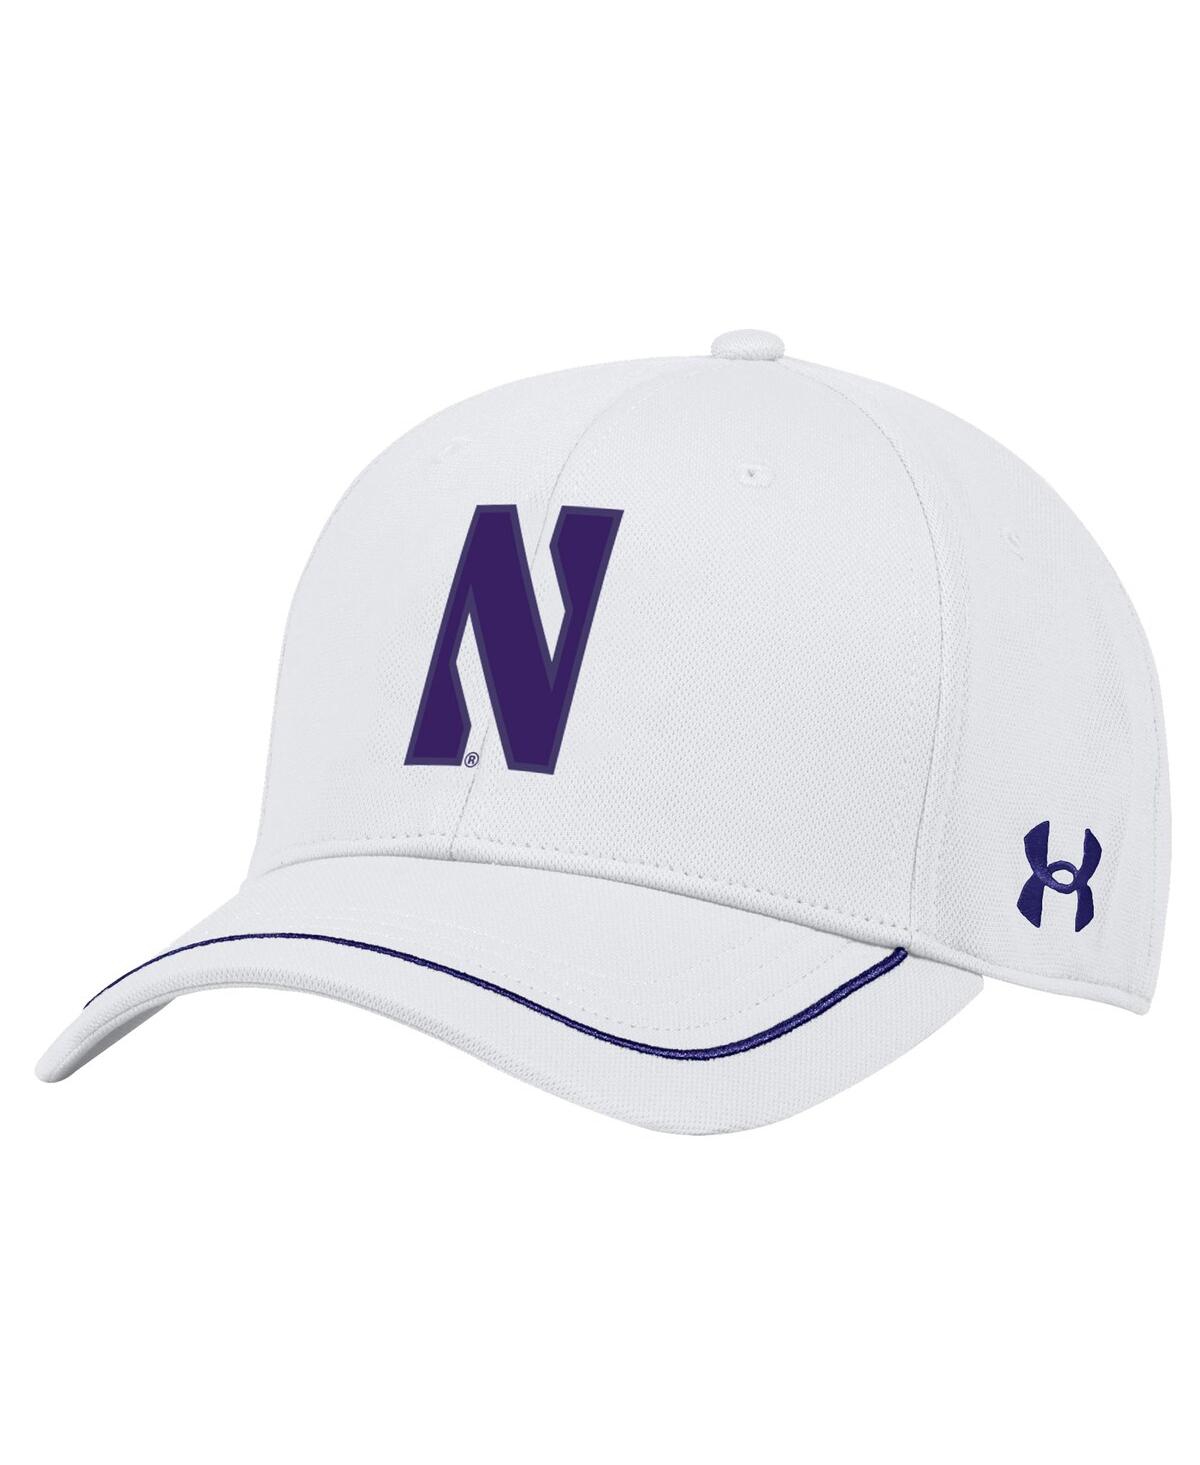 Under Armour Men's  White Northwestern Wildcats Blitzing Accent Iso-chill Adjustable Hat